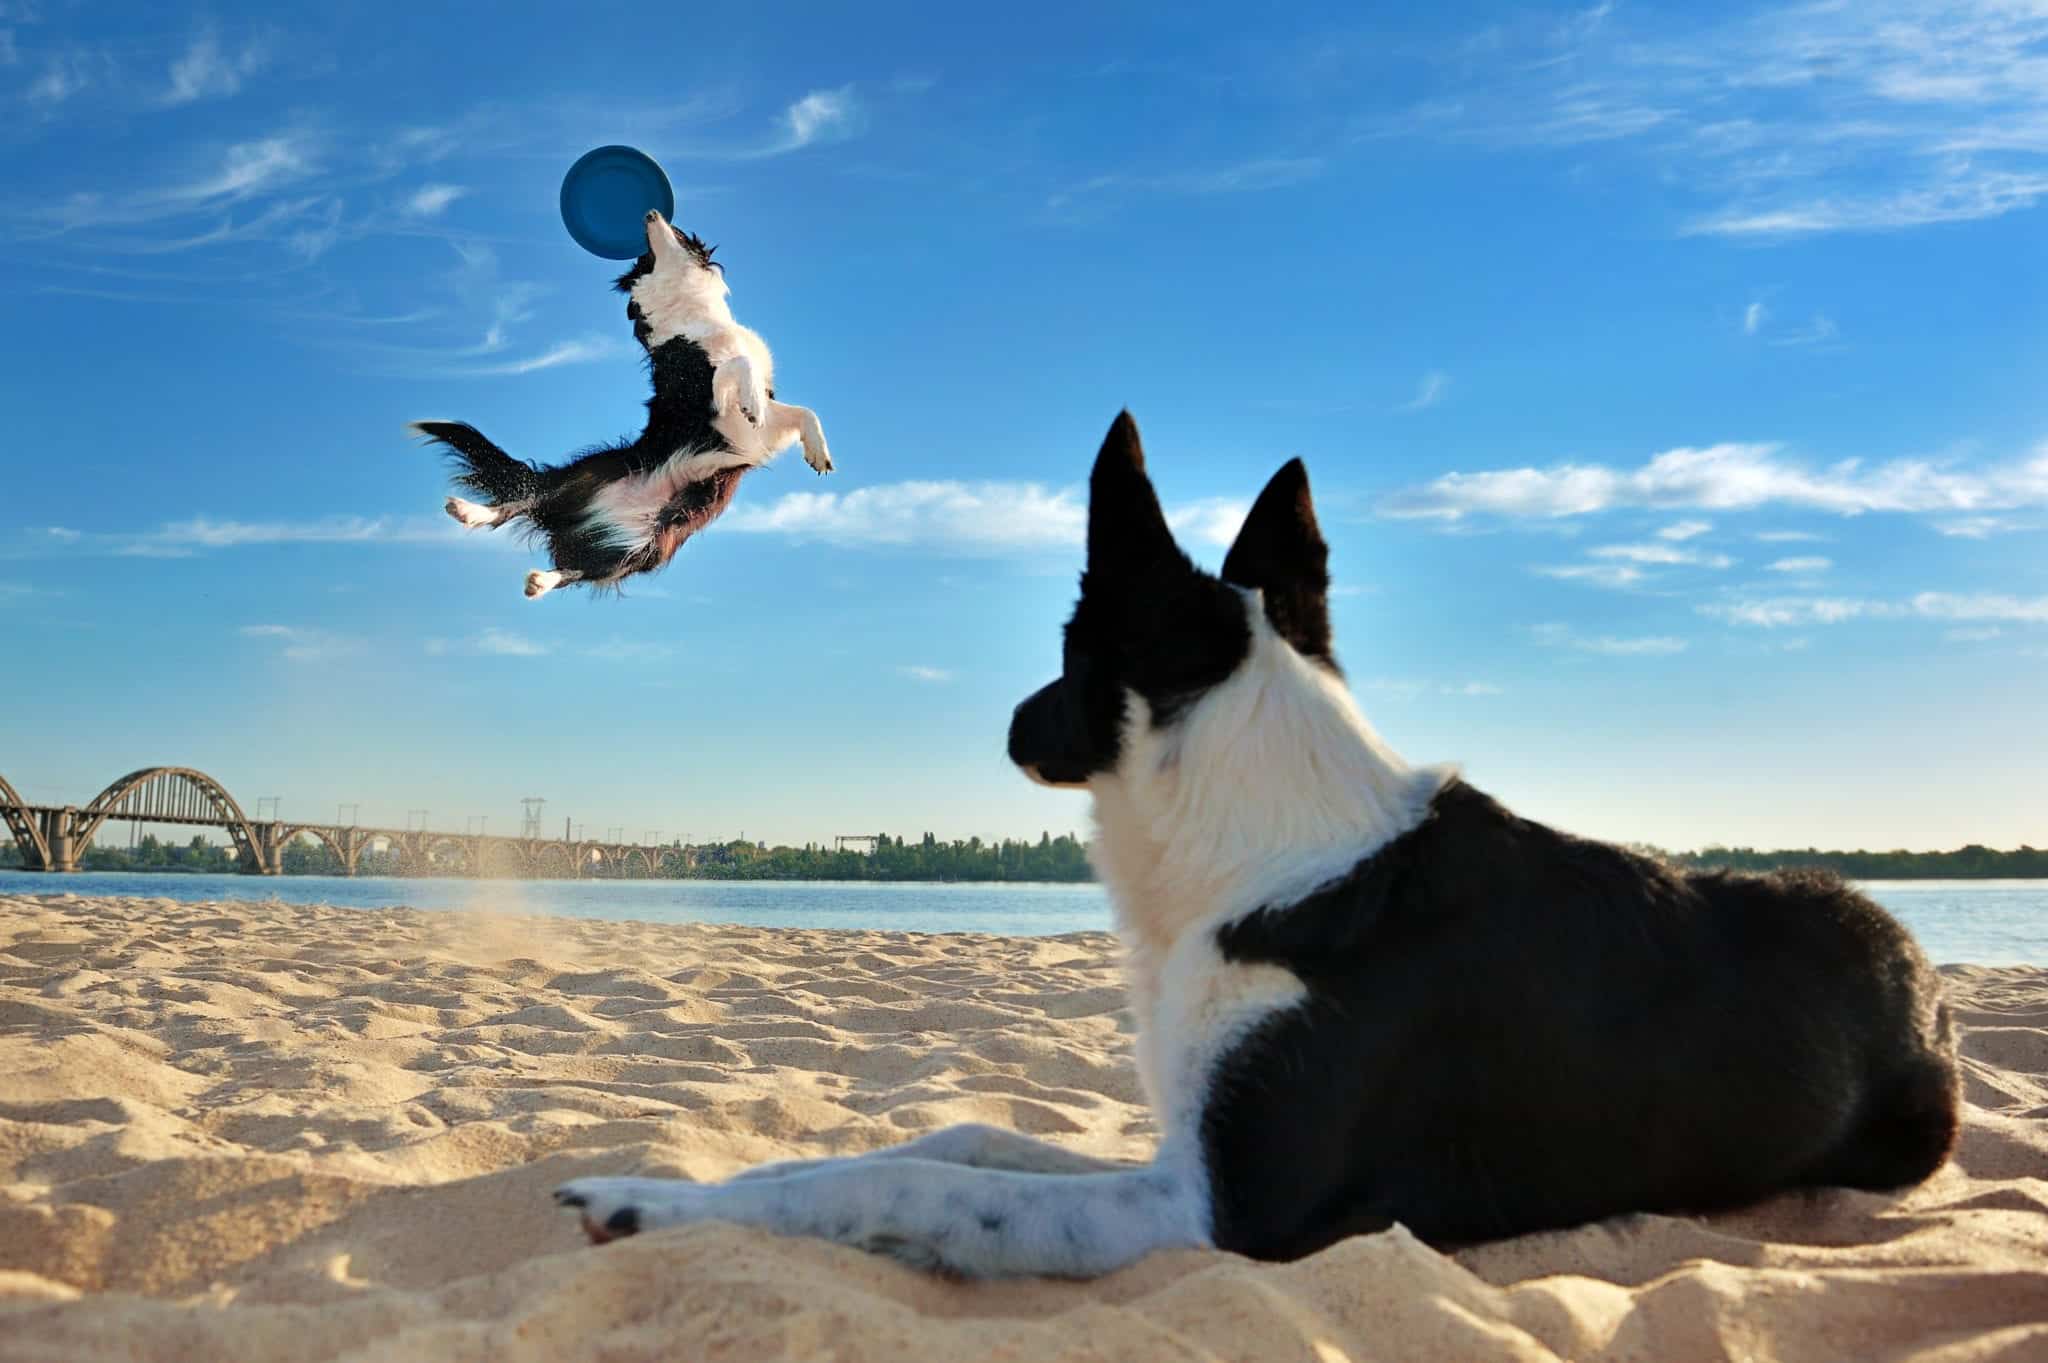 Dog looking at the other dog jumping for a flying disk